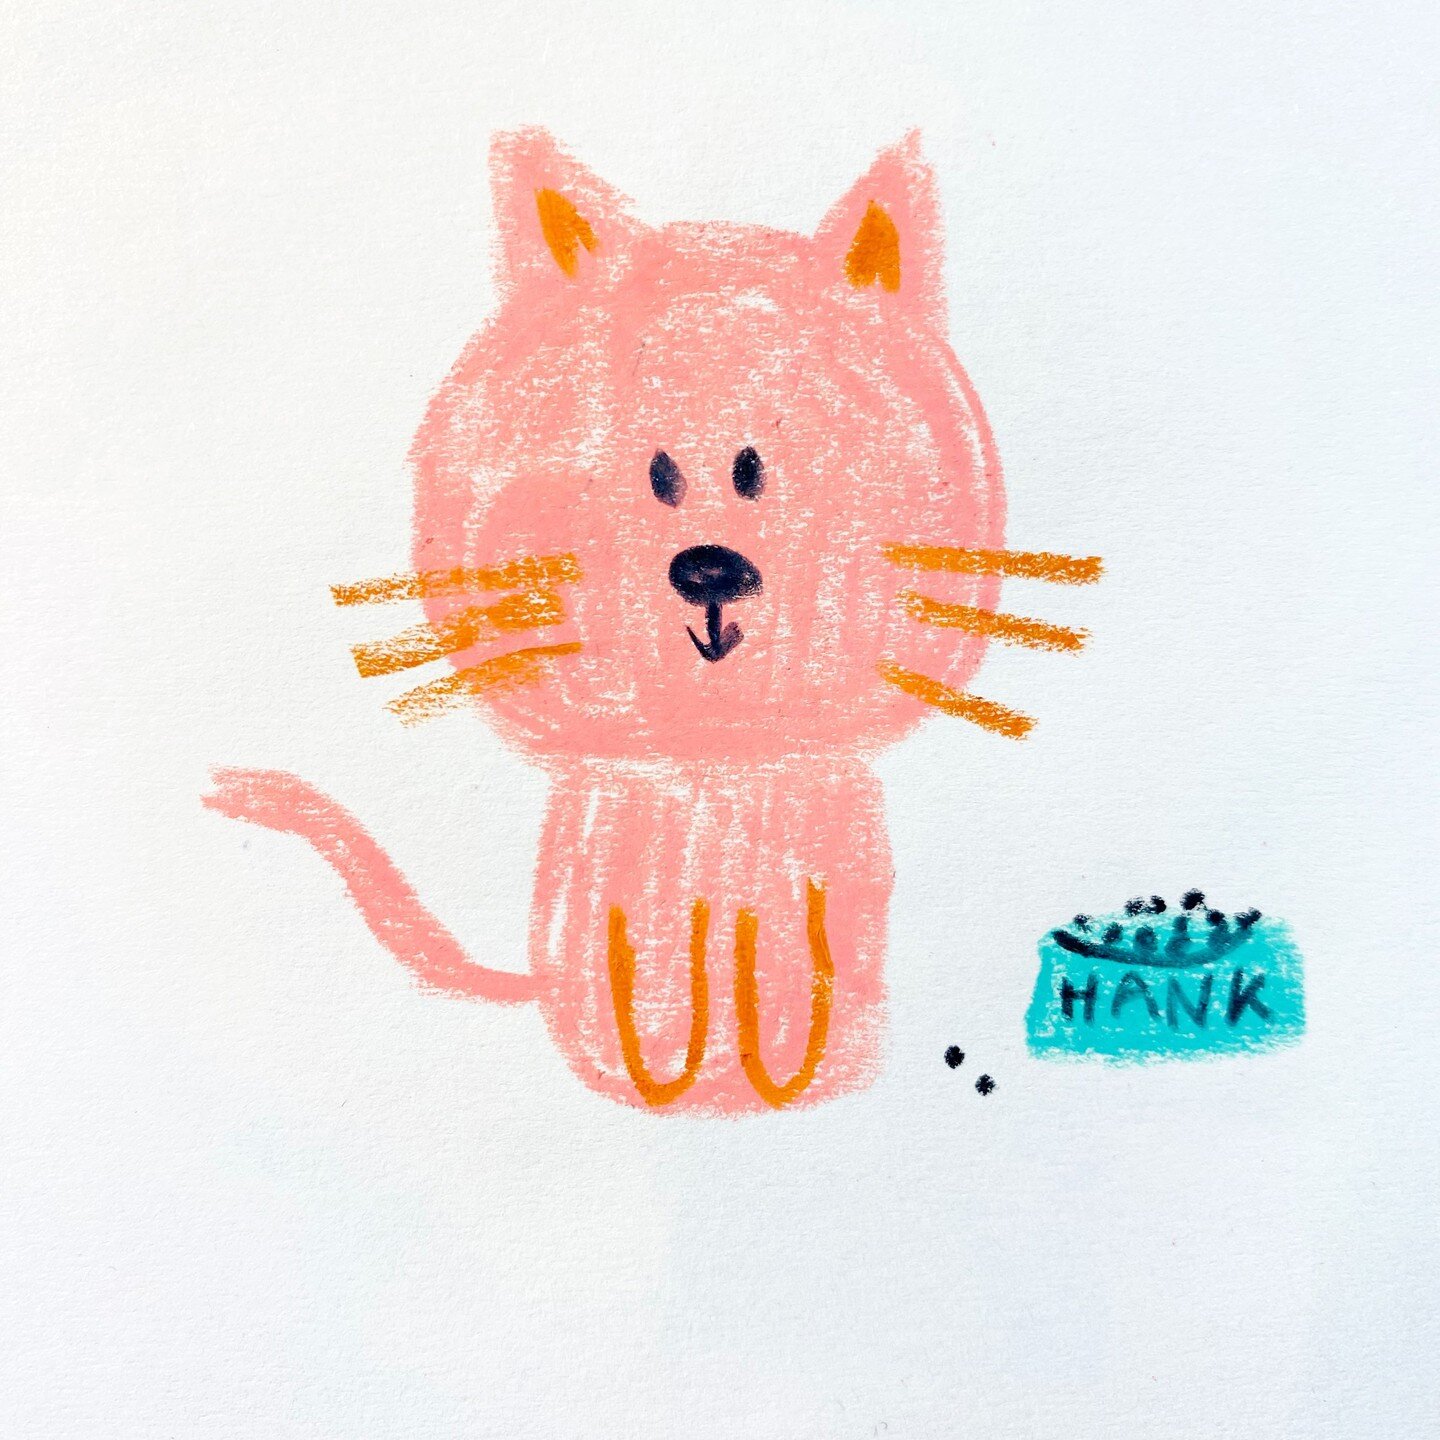 Another day, another kitty cat on the grid! Meet Hank.
.
.
. 
#sketchbook #draweveryday #75artwithgenna #catlife #cat